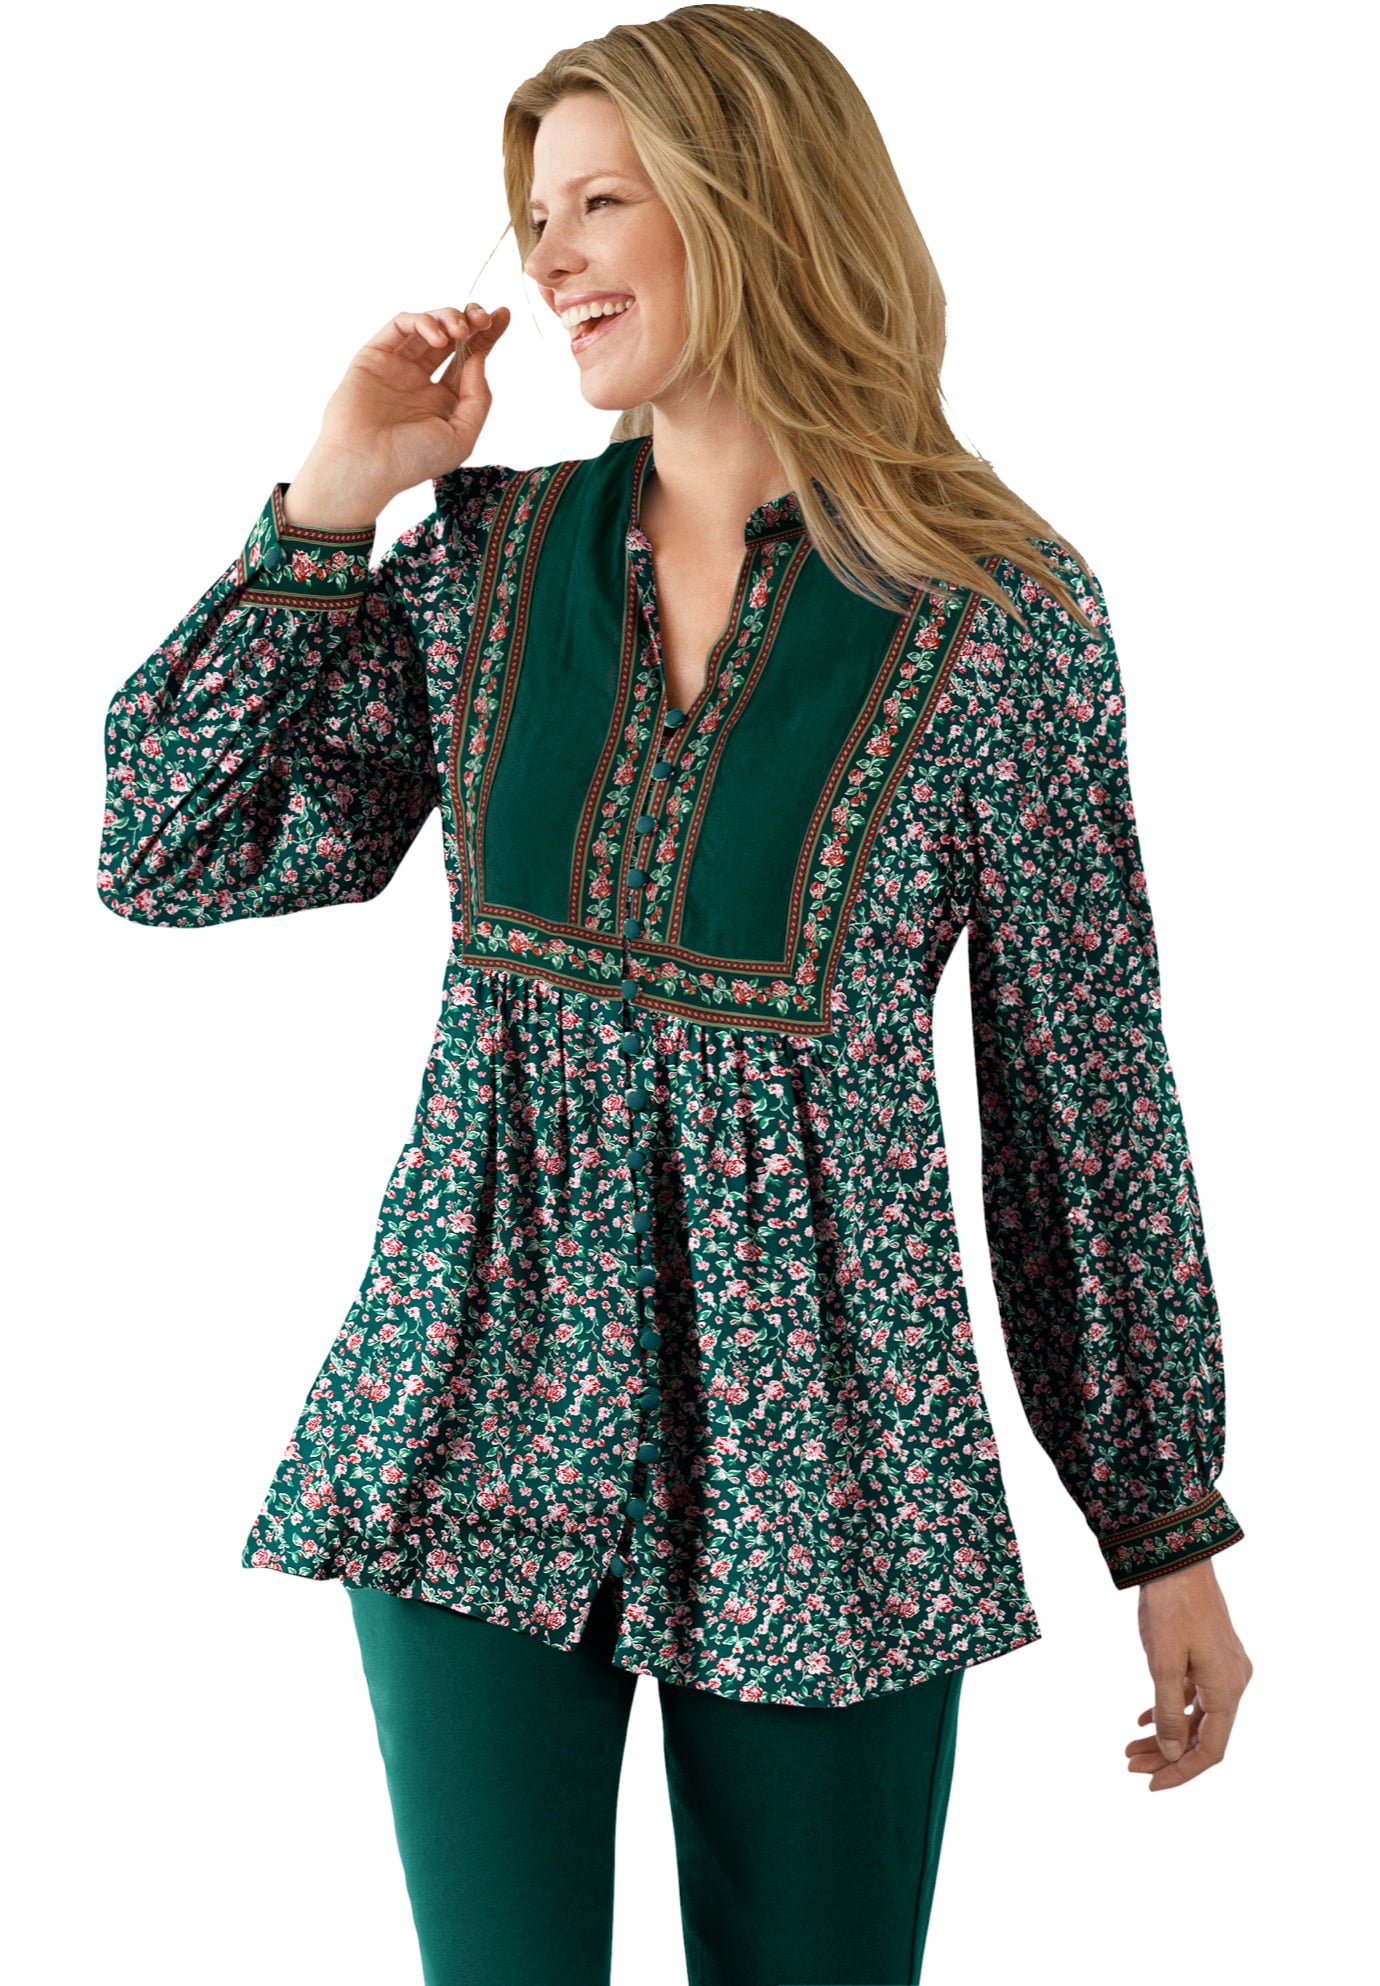 Rullesten elev At adskille Woman Within Women's Plus Size Button-Front Mixed Print Tunic - 4X, Emerald  Green Rose Garden - Walmart.com